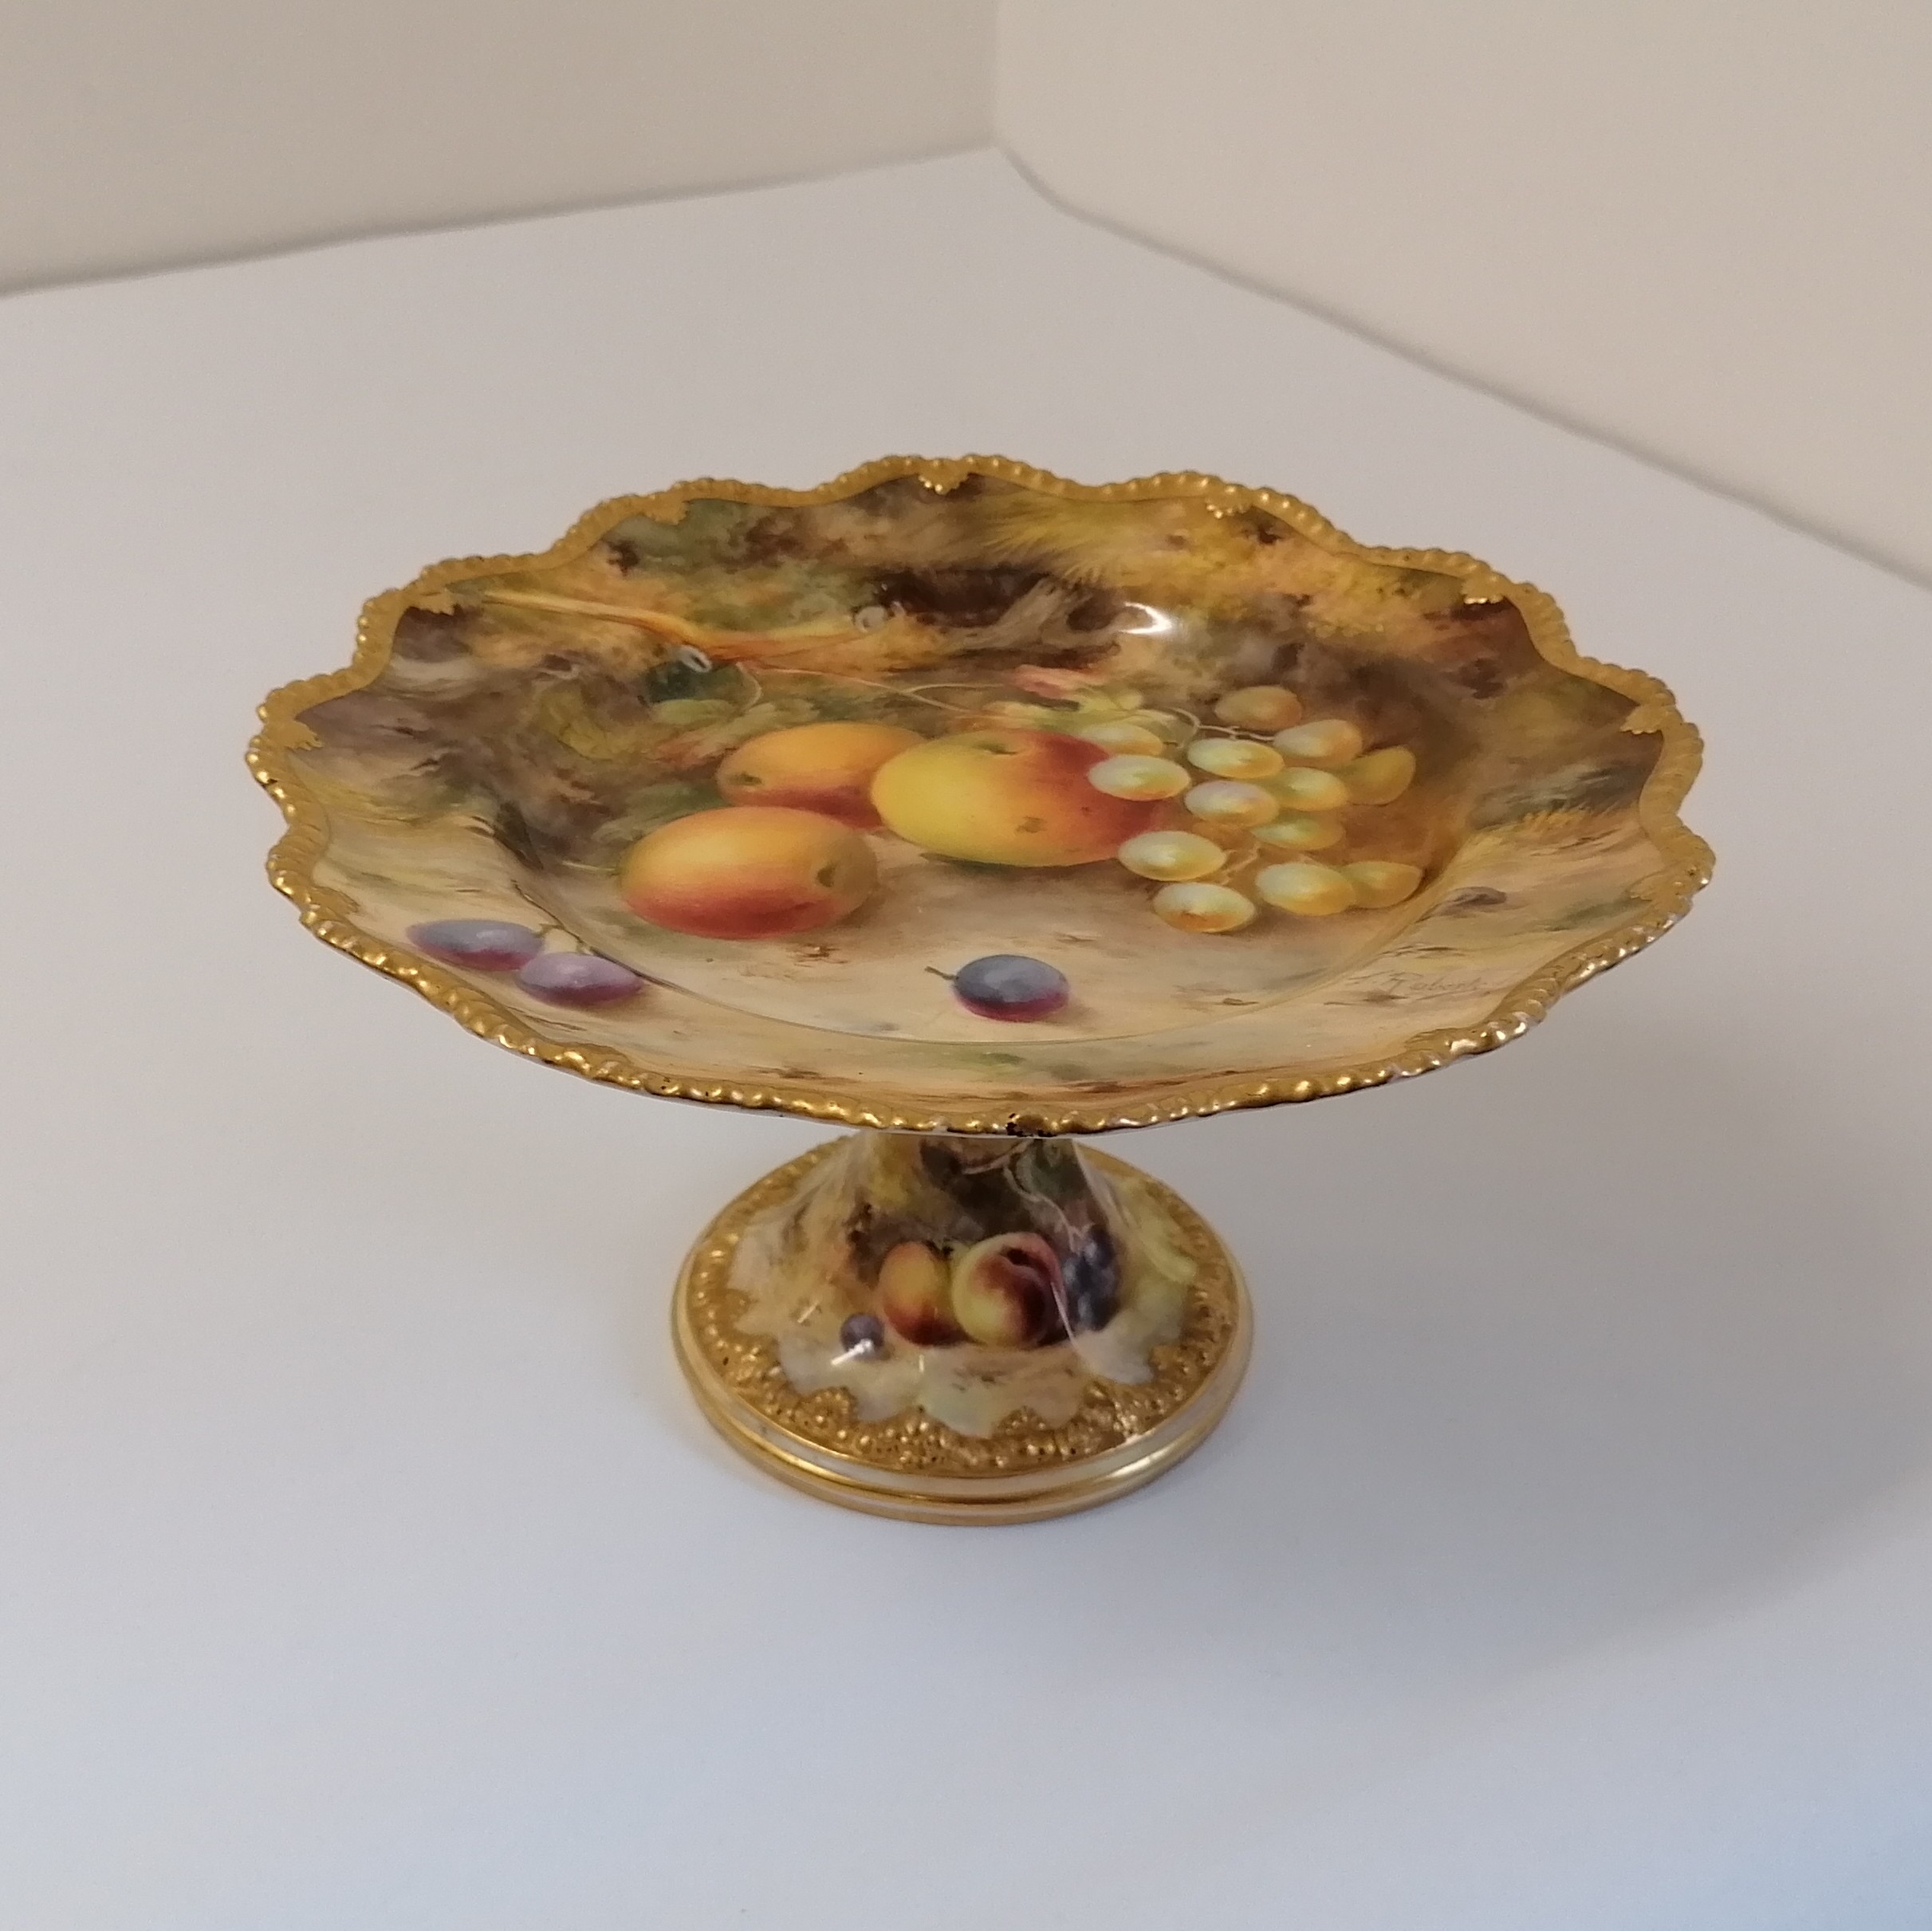 A Royal Worcester hand painted with fruit tazza. Signed by F Roberts (Frank Roberts). Puce mark.